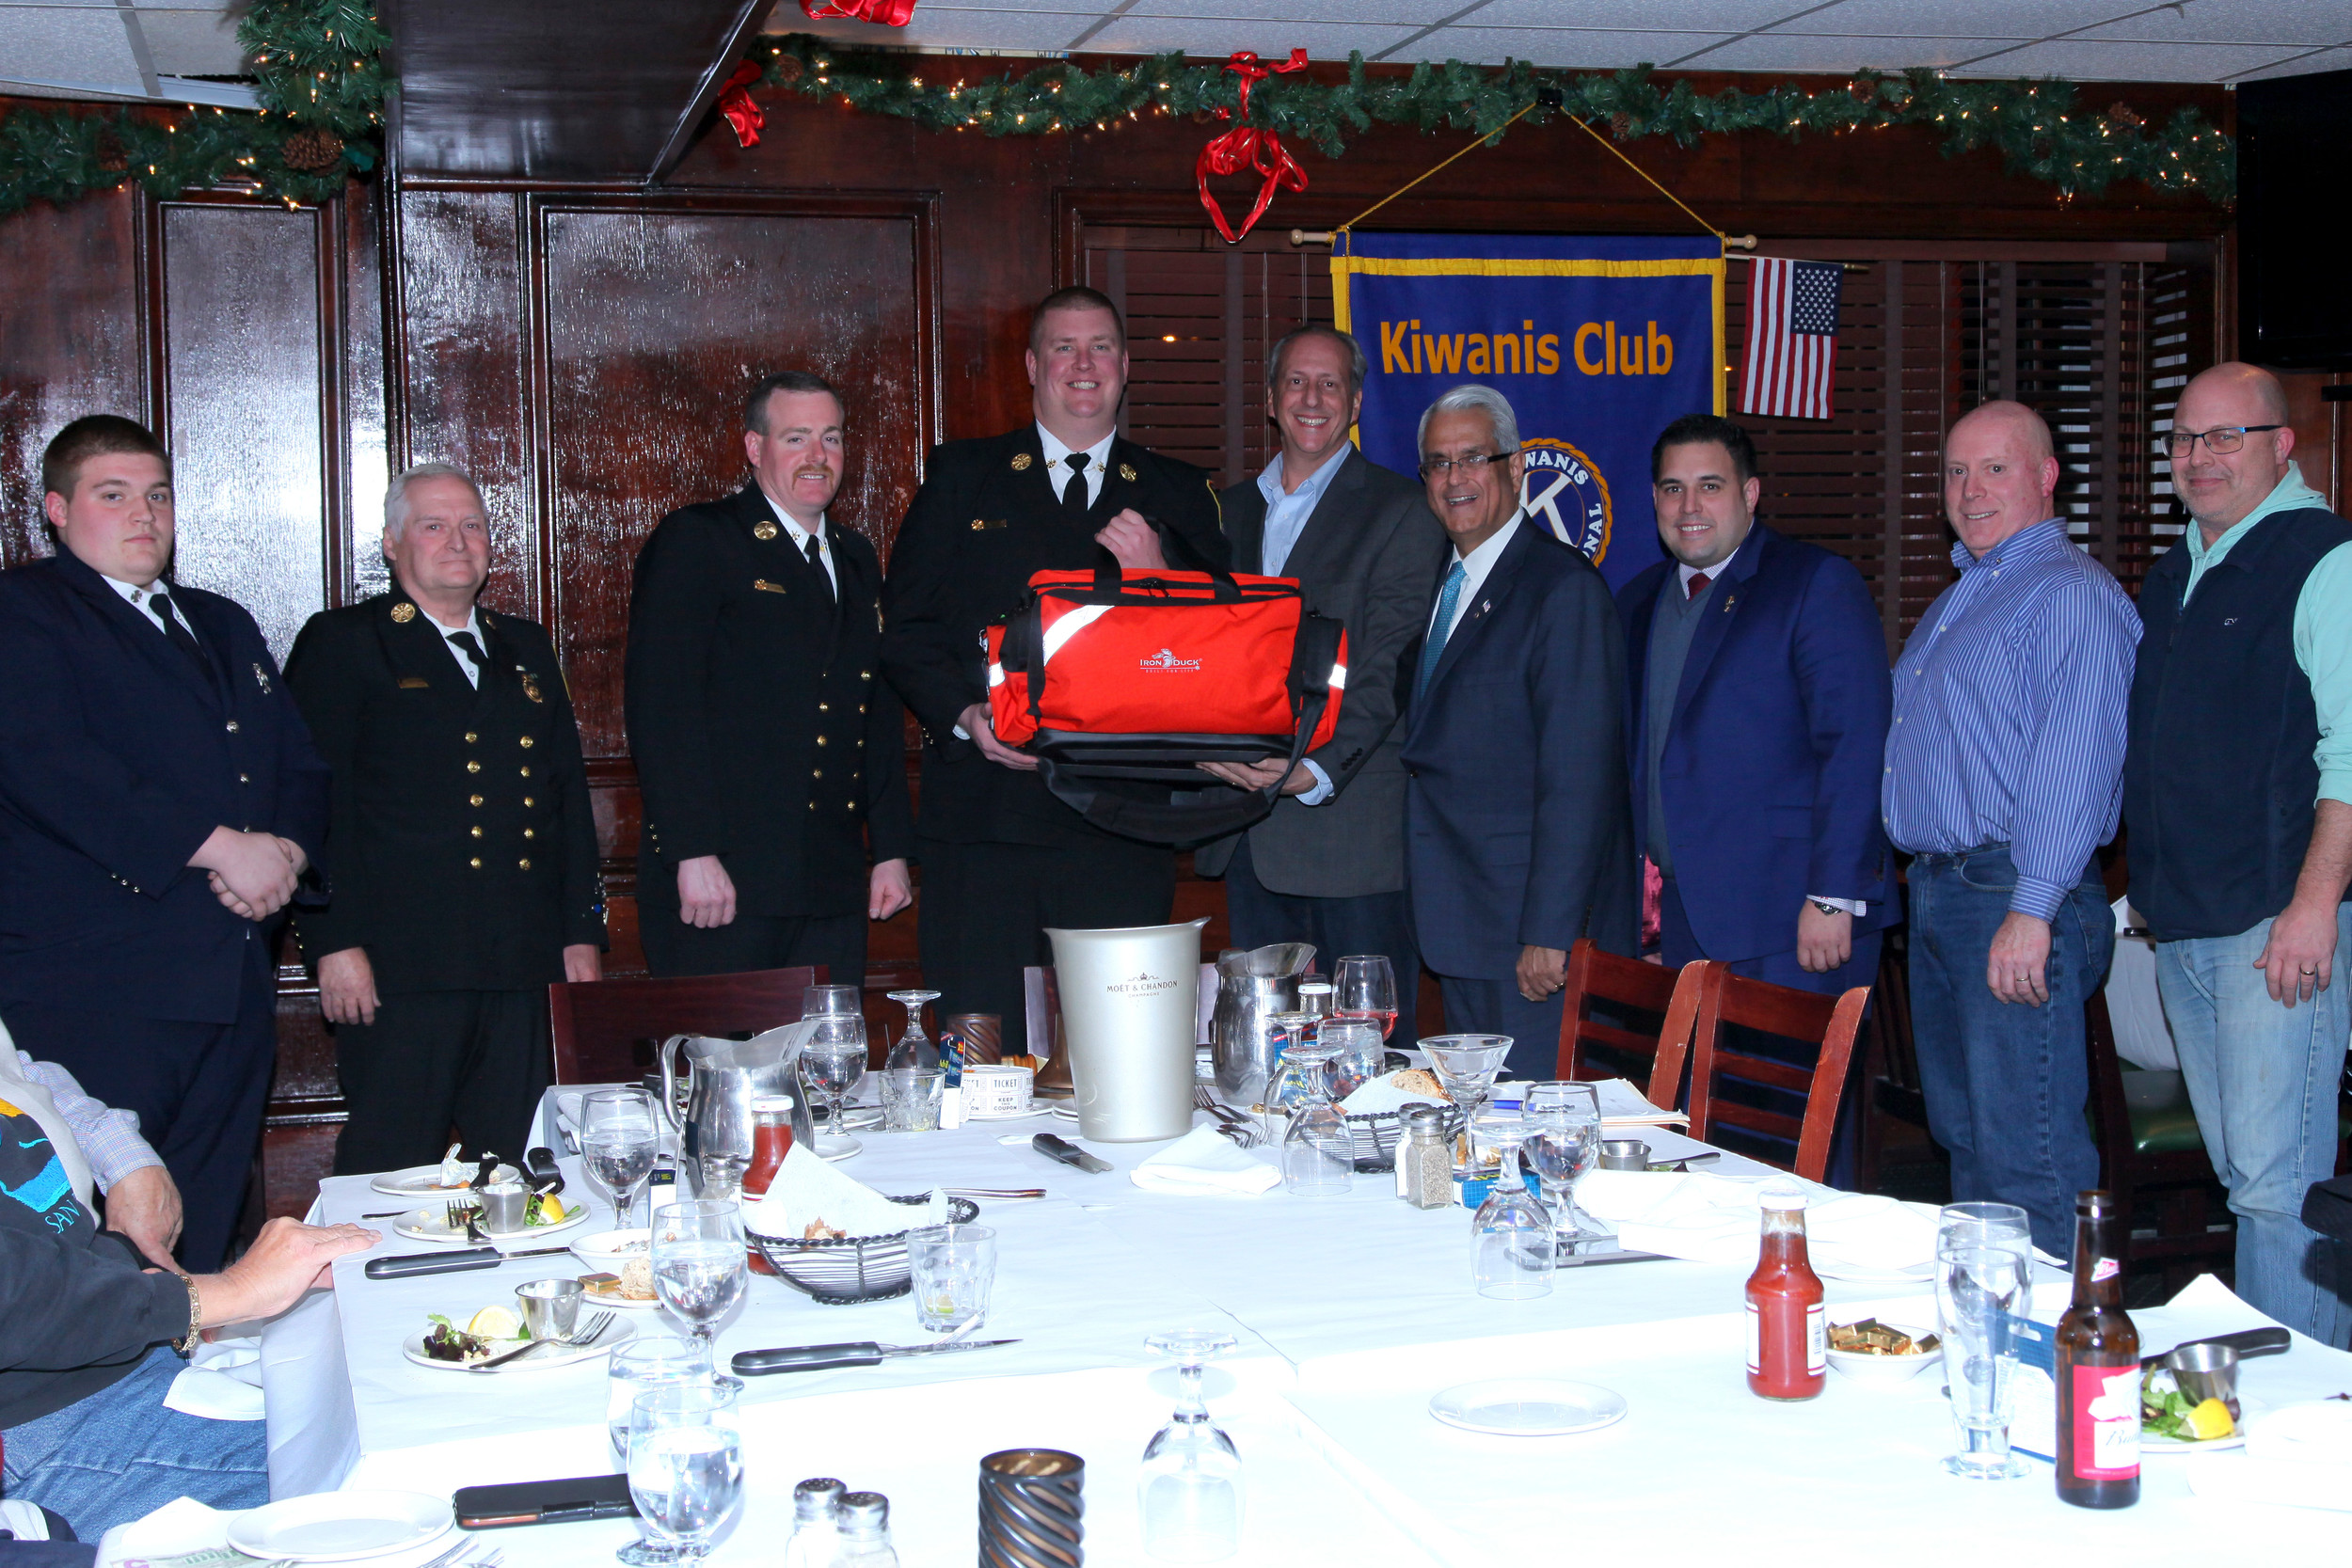 At its monthly meeting in December, Five Towns Kiwanis gave the Valley Stream Fire Department pediatric trauma equipment. From left were Kevin Aliventi, Gene O’Brien II, Brian Ferrucci, First Asst. Chief Jason Croak, Five Towns Kiwanis President Thomas Cohen, Hempstead Town Supervisor Anthony Santino, Councilman Anthony D’Esposito, Kiwanis Secretary Seth Lally and Vice President David Vines.